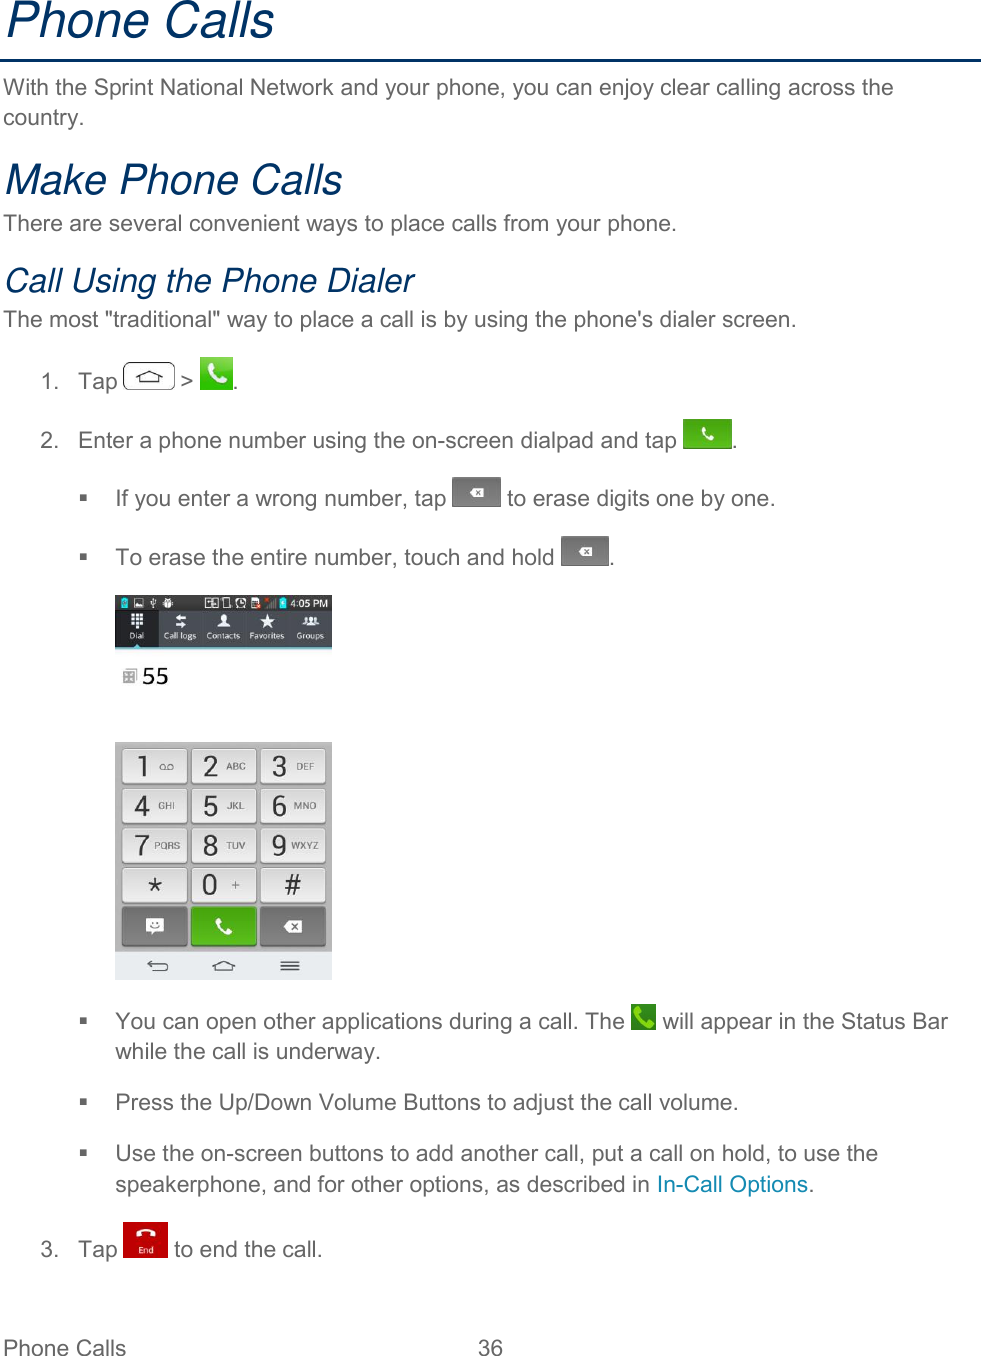  Phone Calls  36   Phone Calls  With the Sprint National Network and your phone, you can enjoy clear calling across the country. Make Phone Calls There are several convenient ways to place calls from your phone. Call Using the Phone Dialer The most &quot;traditional&quot; way to place a call is by using the phone&apos;s dialer screen. 1.  Tap   &gt;  . 2.  Enter a phone number using the on-screen dialpad and tap  .   If you enter a wrong number, tap   to erase digits one by one.   To erase the entire number, touch and hold  .    You can open other applications during a call. The   will appear in the Status Bar while the call is underway.   Press the Up/Down Volume Buttons to adjust the call volume.   Use the on-screen buttons to add another call, put a call on hold, to use the speakerphone, and for other options, as described in In-Call Options. 3.  Tap   to end the call. 